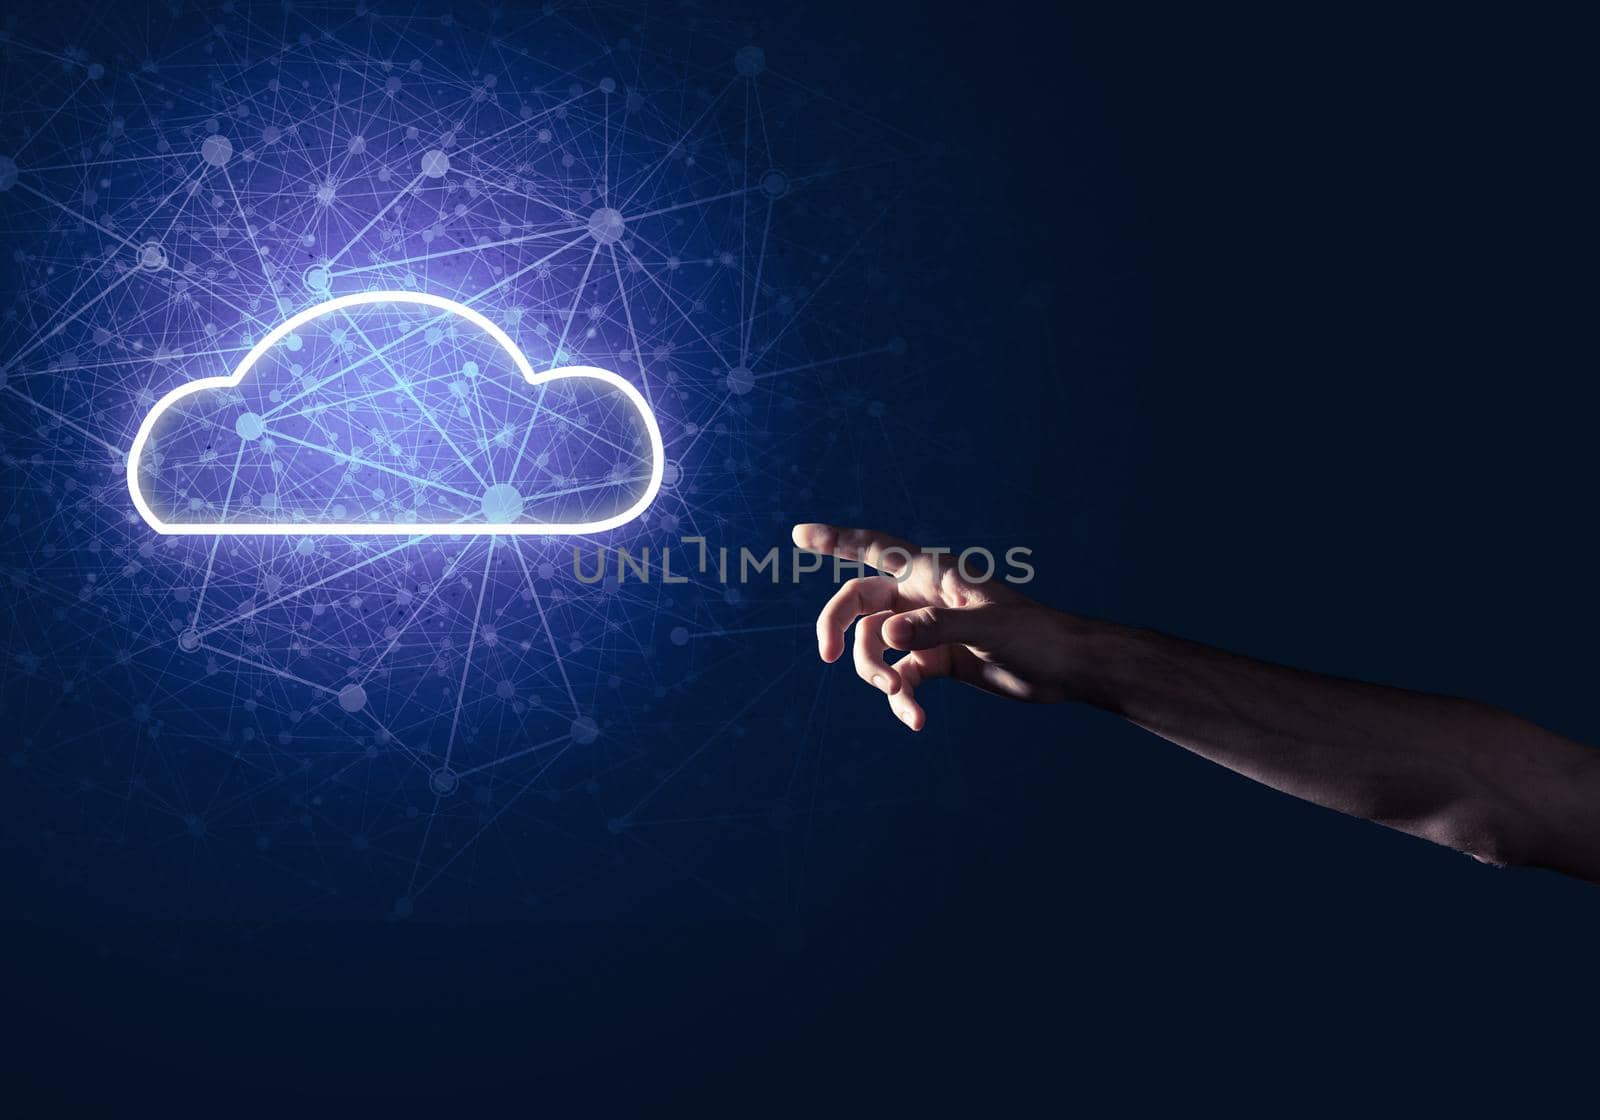 Digital cloud icon as symbol of wireless connection on dark background by adam121